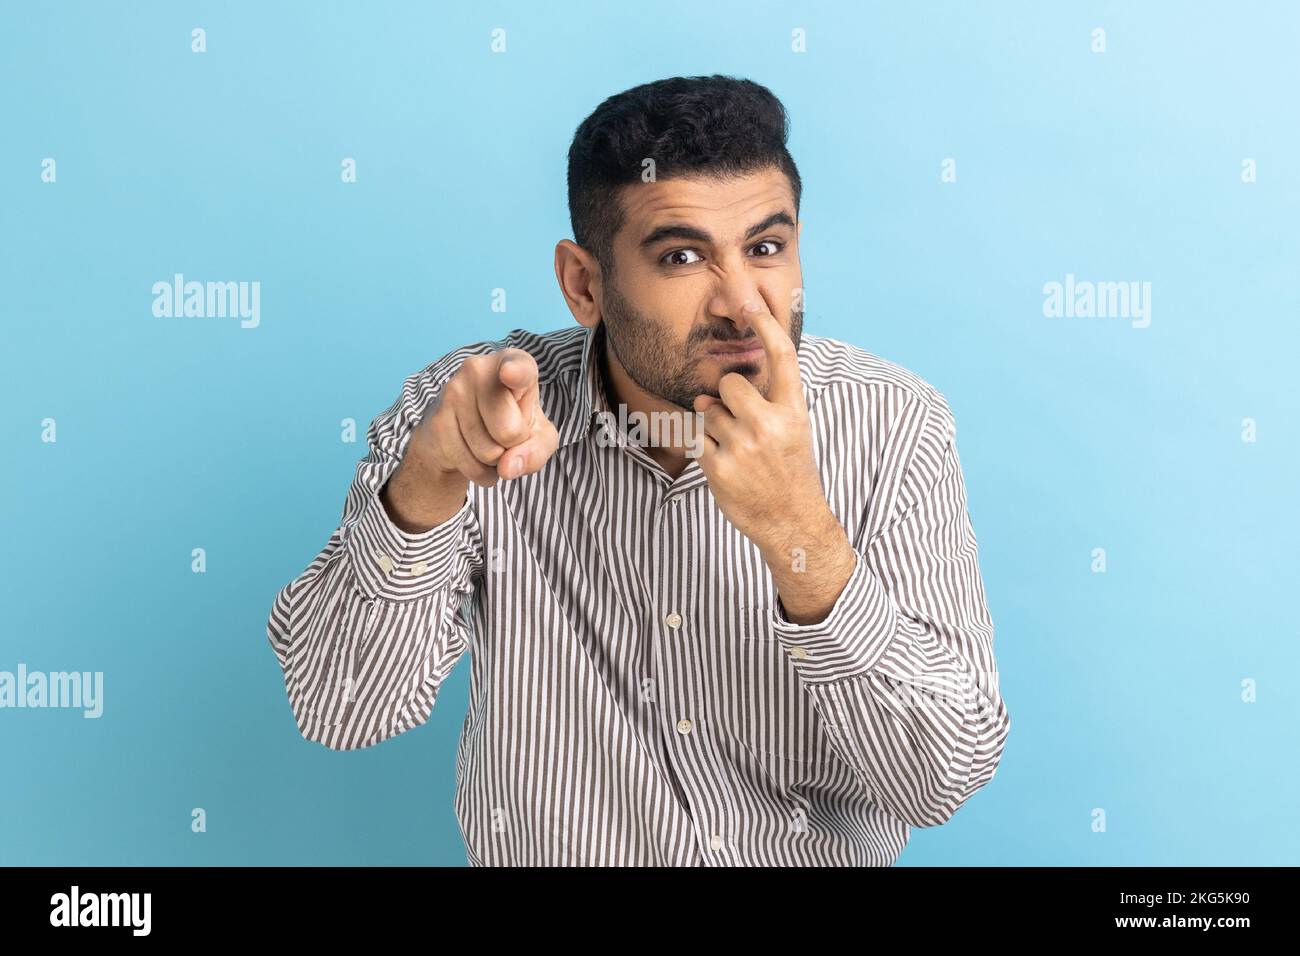 You are liar. Portrait of angry bearded man touching his nose with finger and showing lie gesture, body language, wearing striped shirt. Indoor studio shot isolated on blue background. Stock Photo